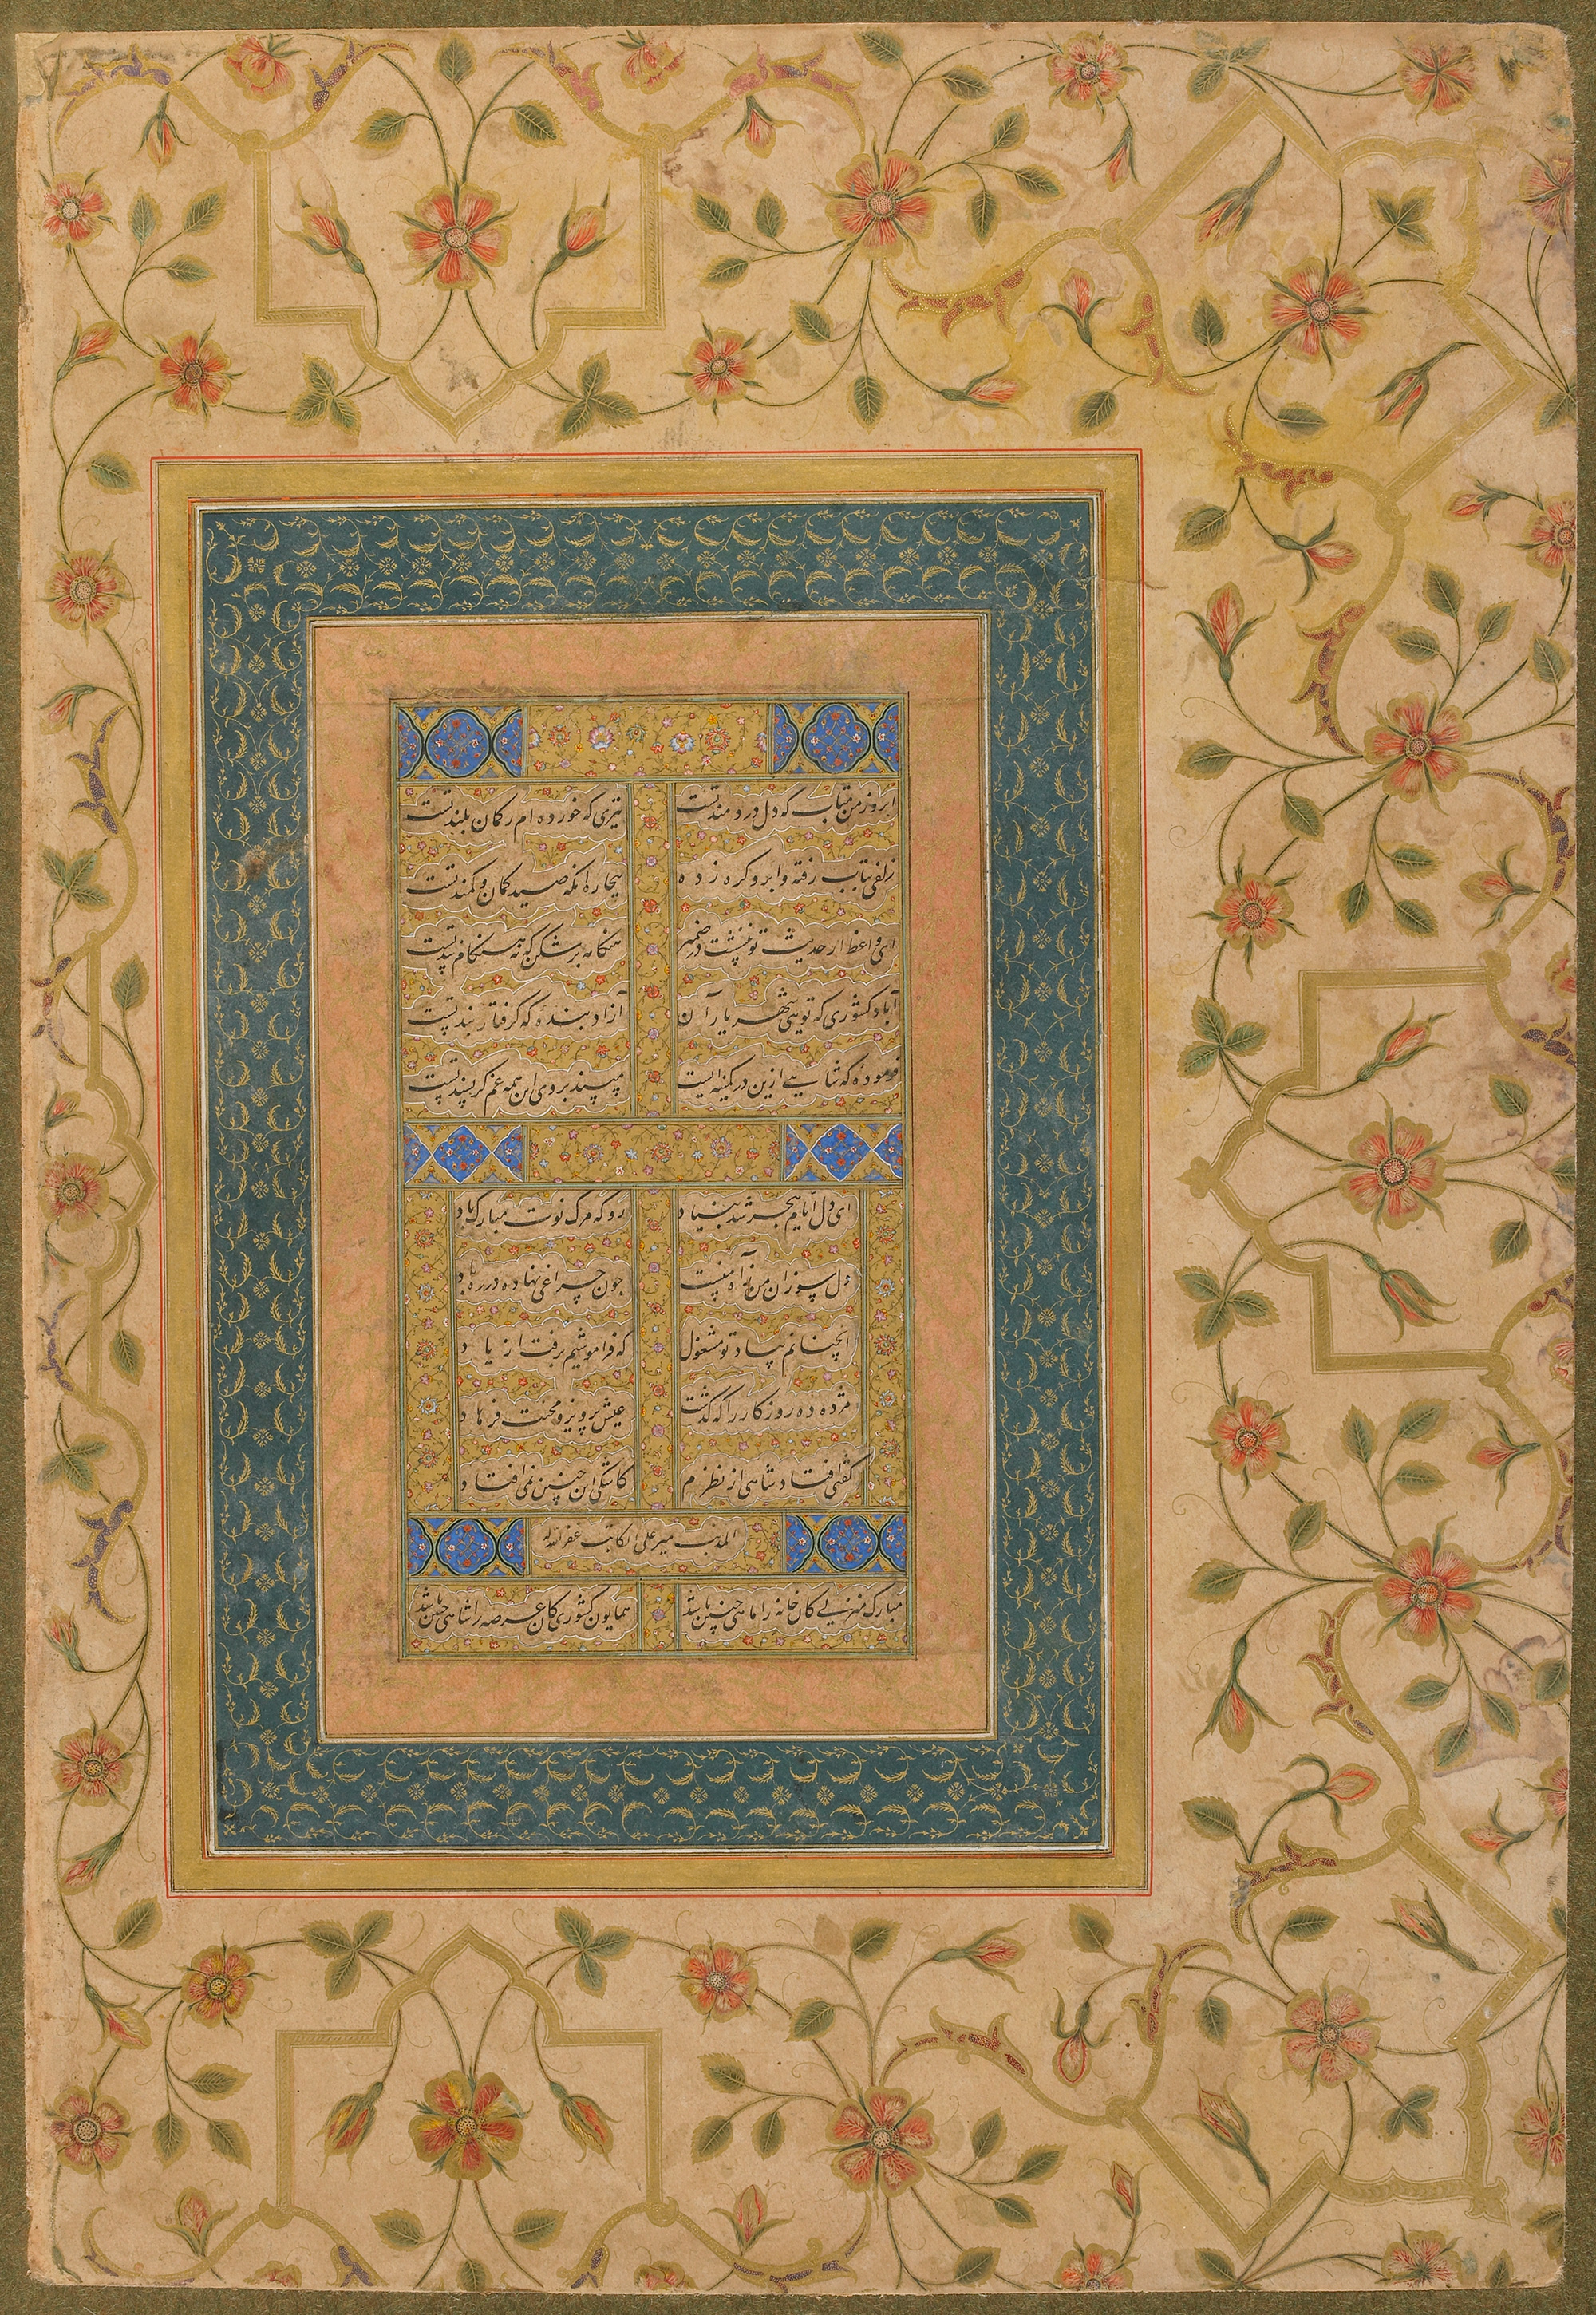 Image of Folio from the Late Shah Jahan Album